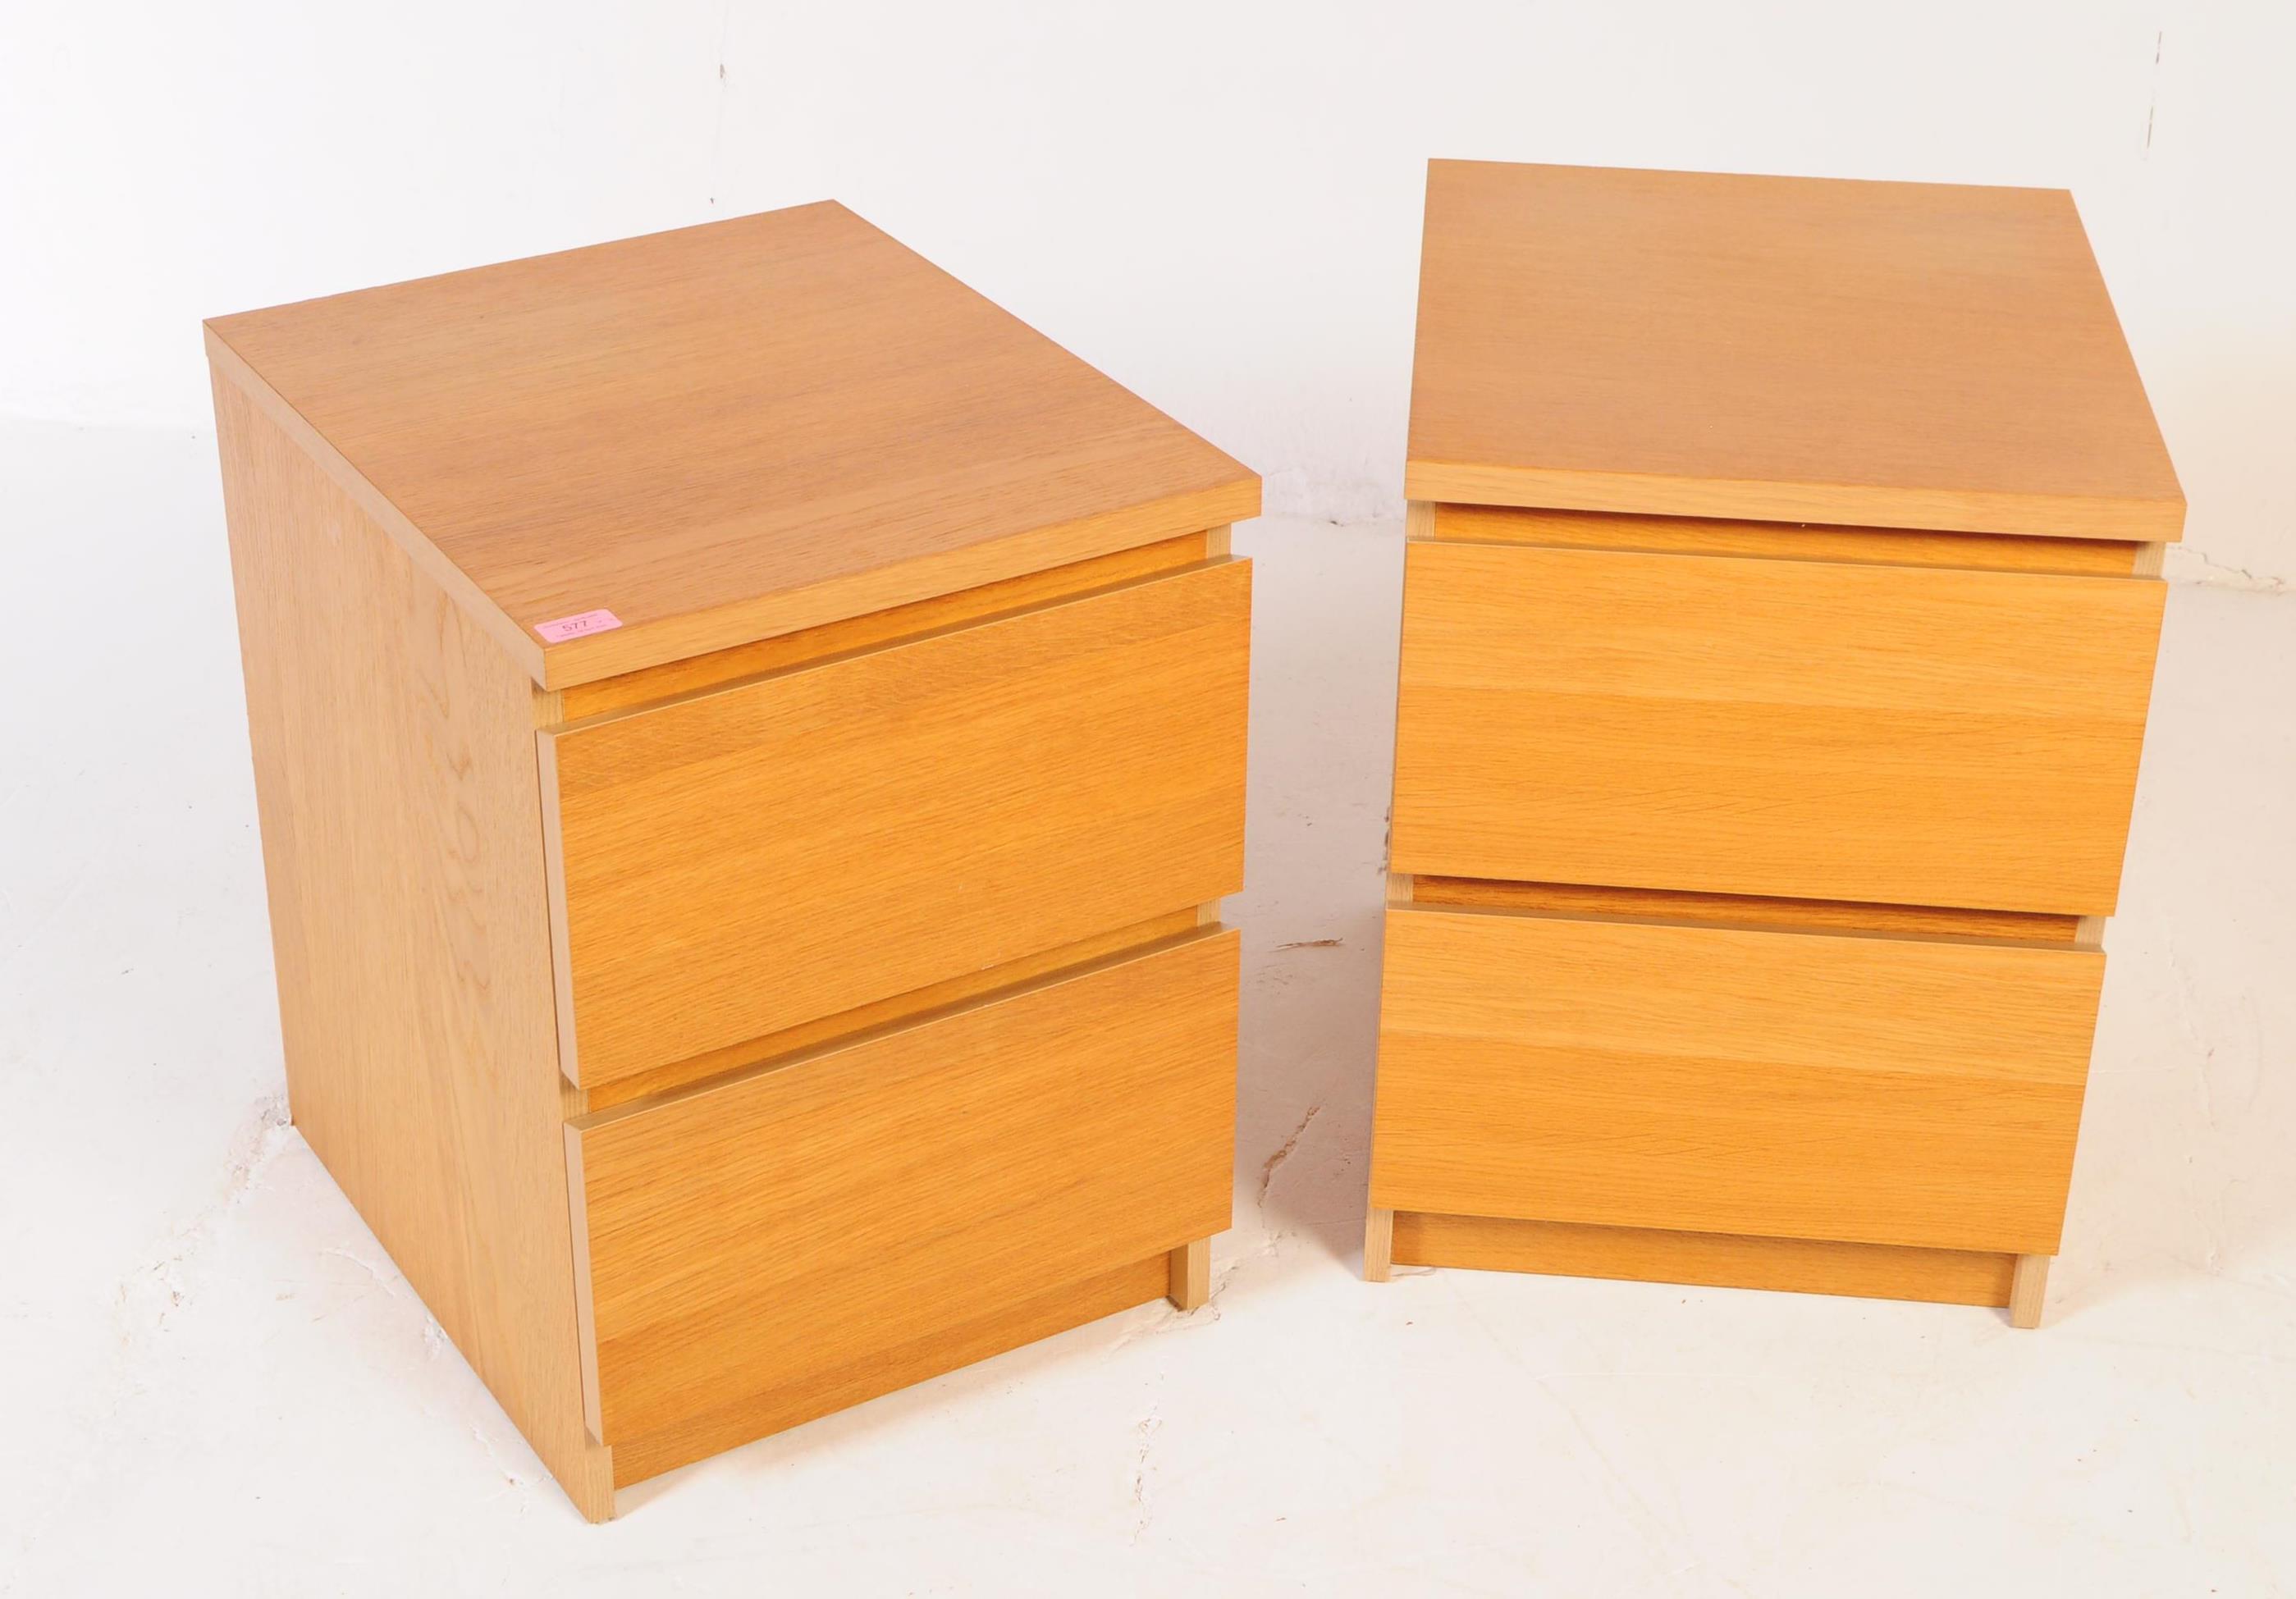 IKEA MALM - PAIR OF 20TH CENTURY BEECH BEDSIDES - Image 3 of 6